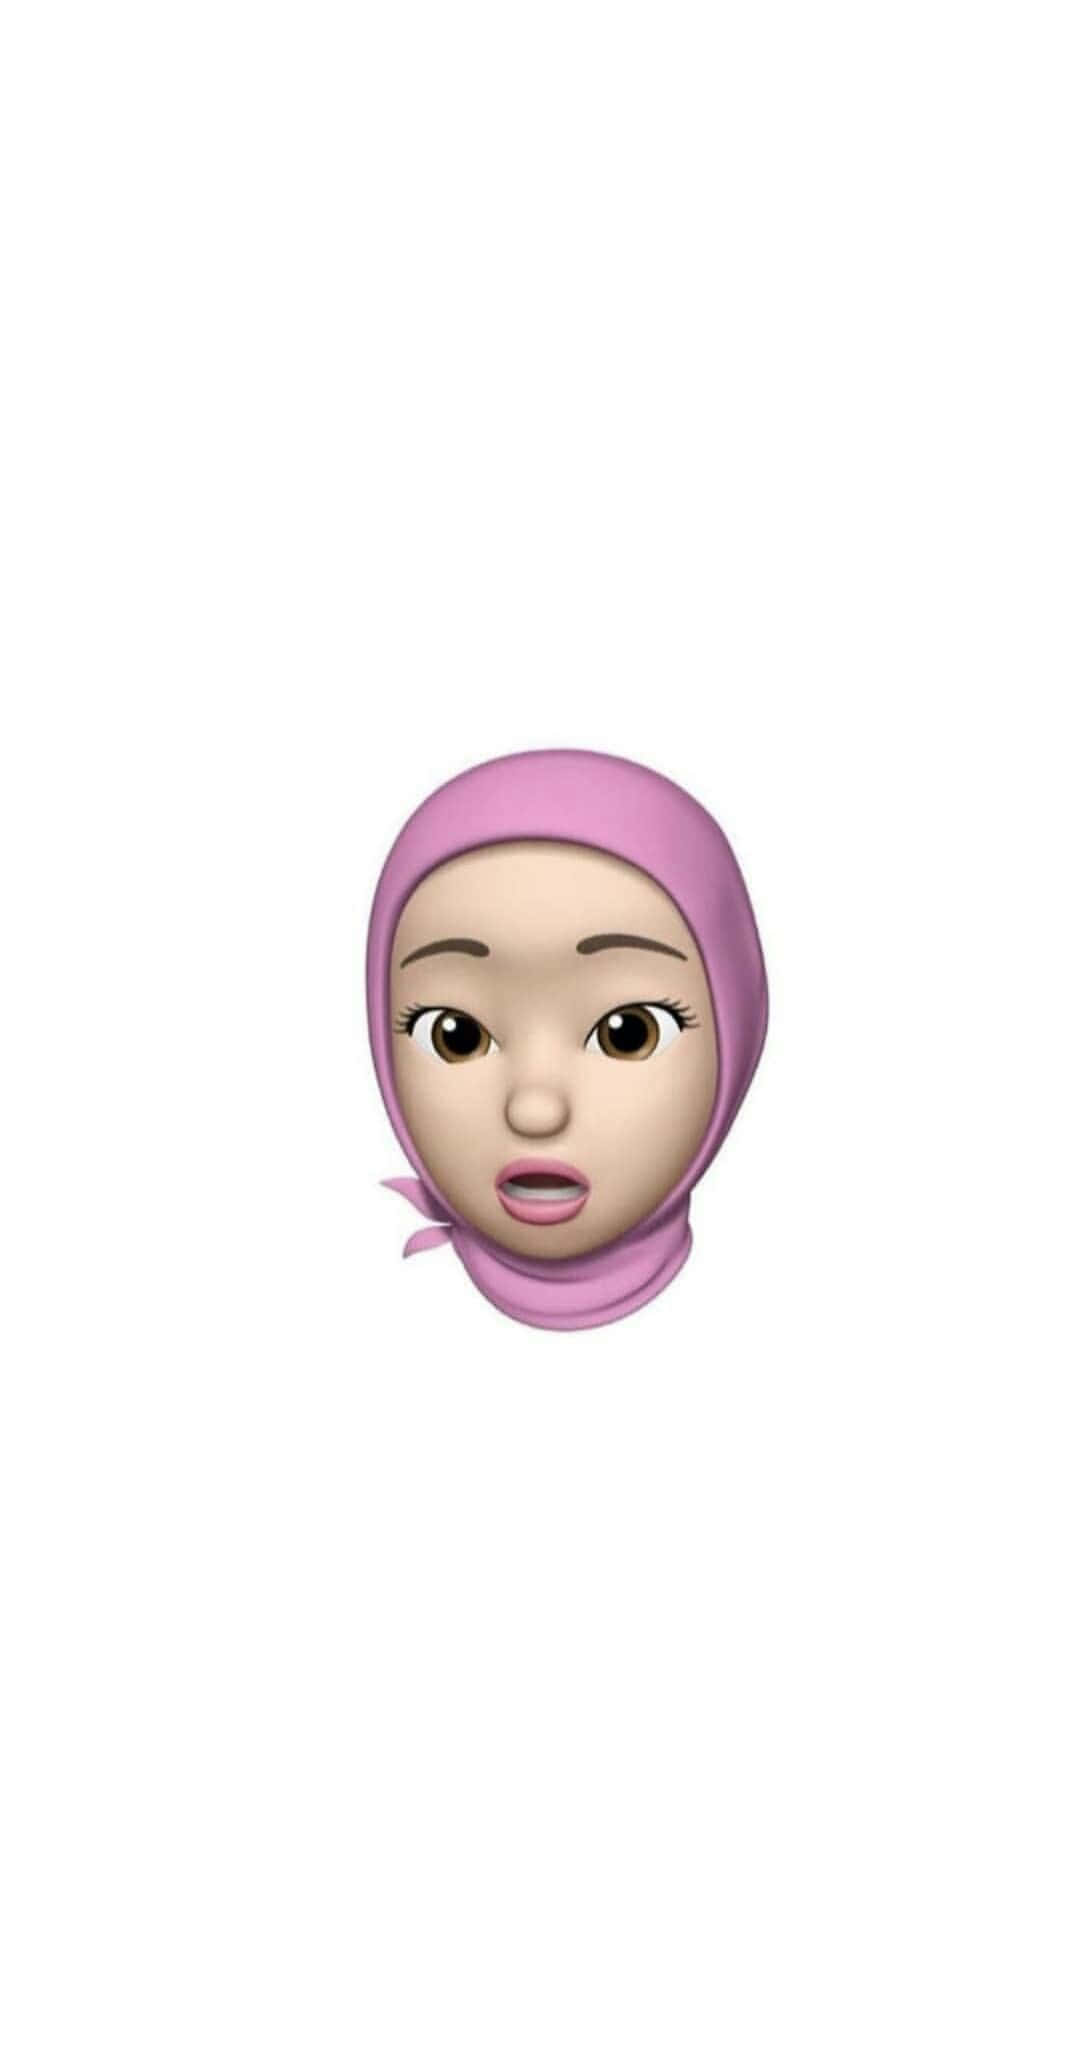 Get Ready to Express Yourself with Animojis! Wallpaper